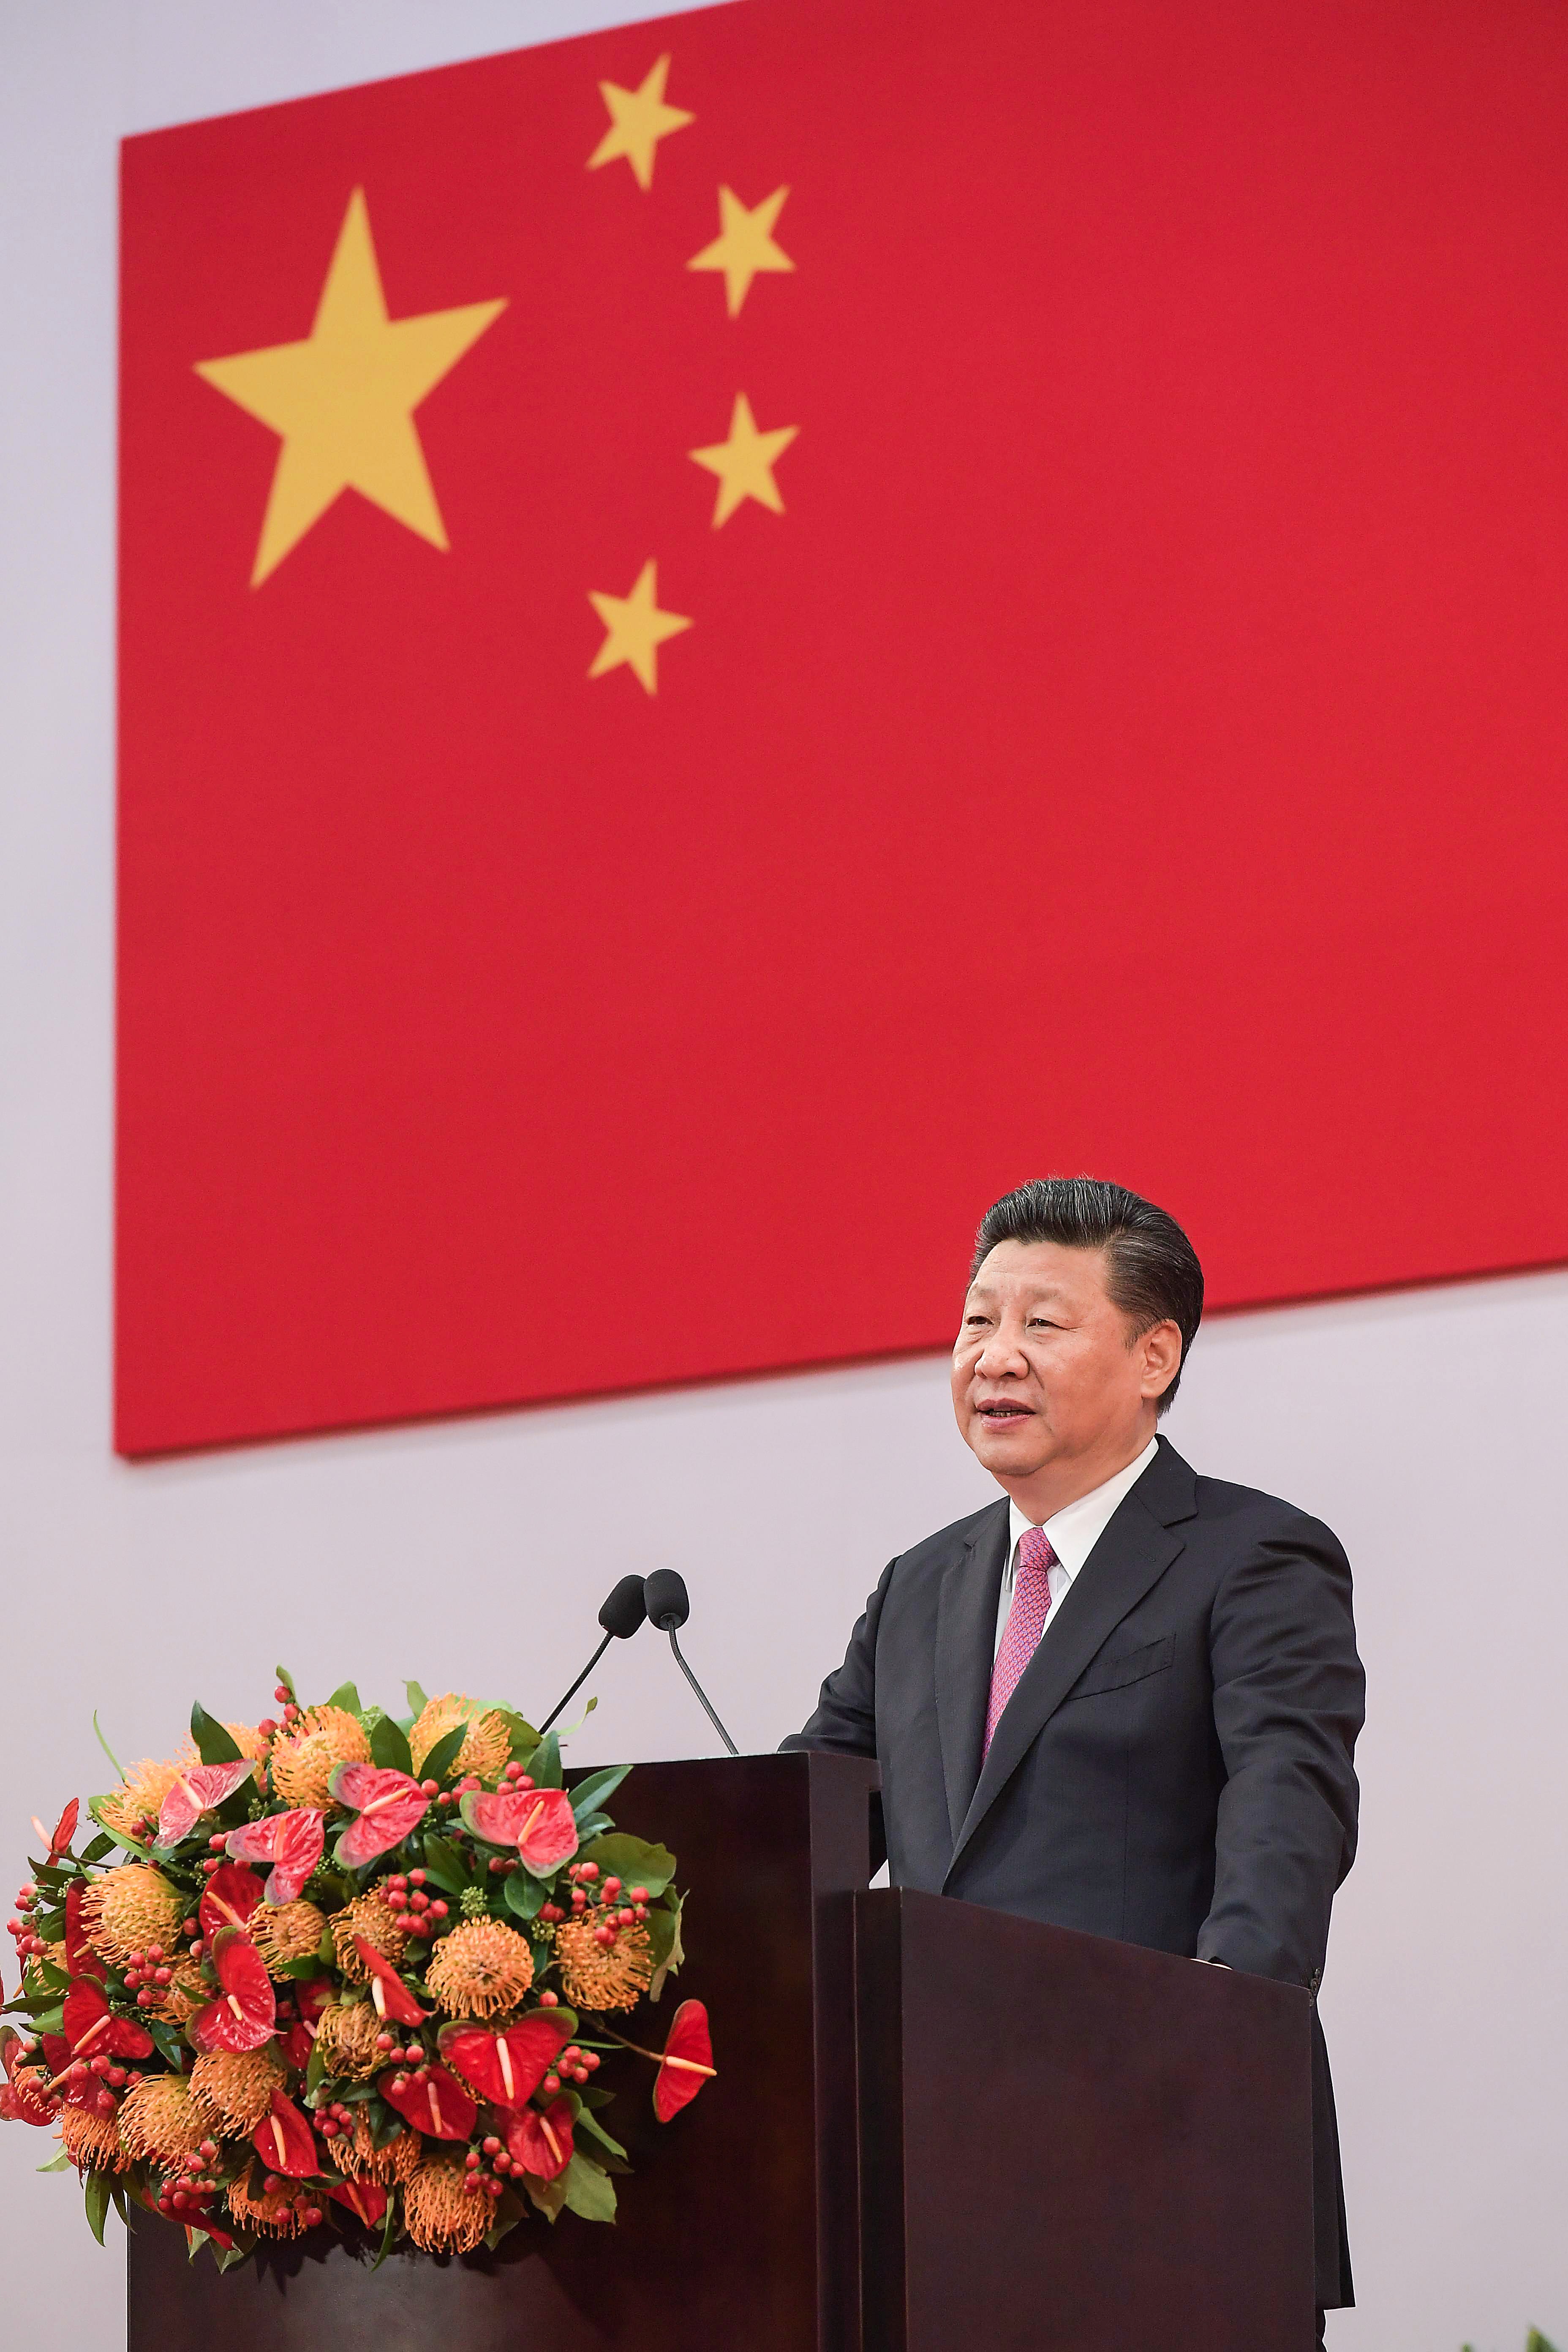 President Xi Jinping hinted at dialogue with opposition forces in Hong Kong. Photo: ISD